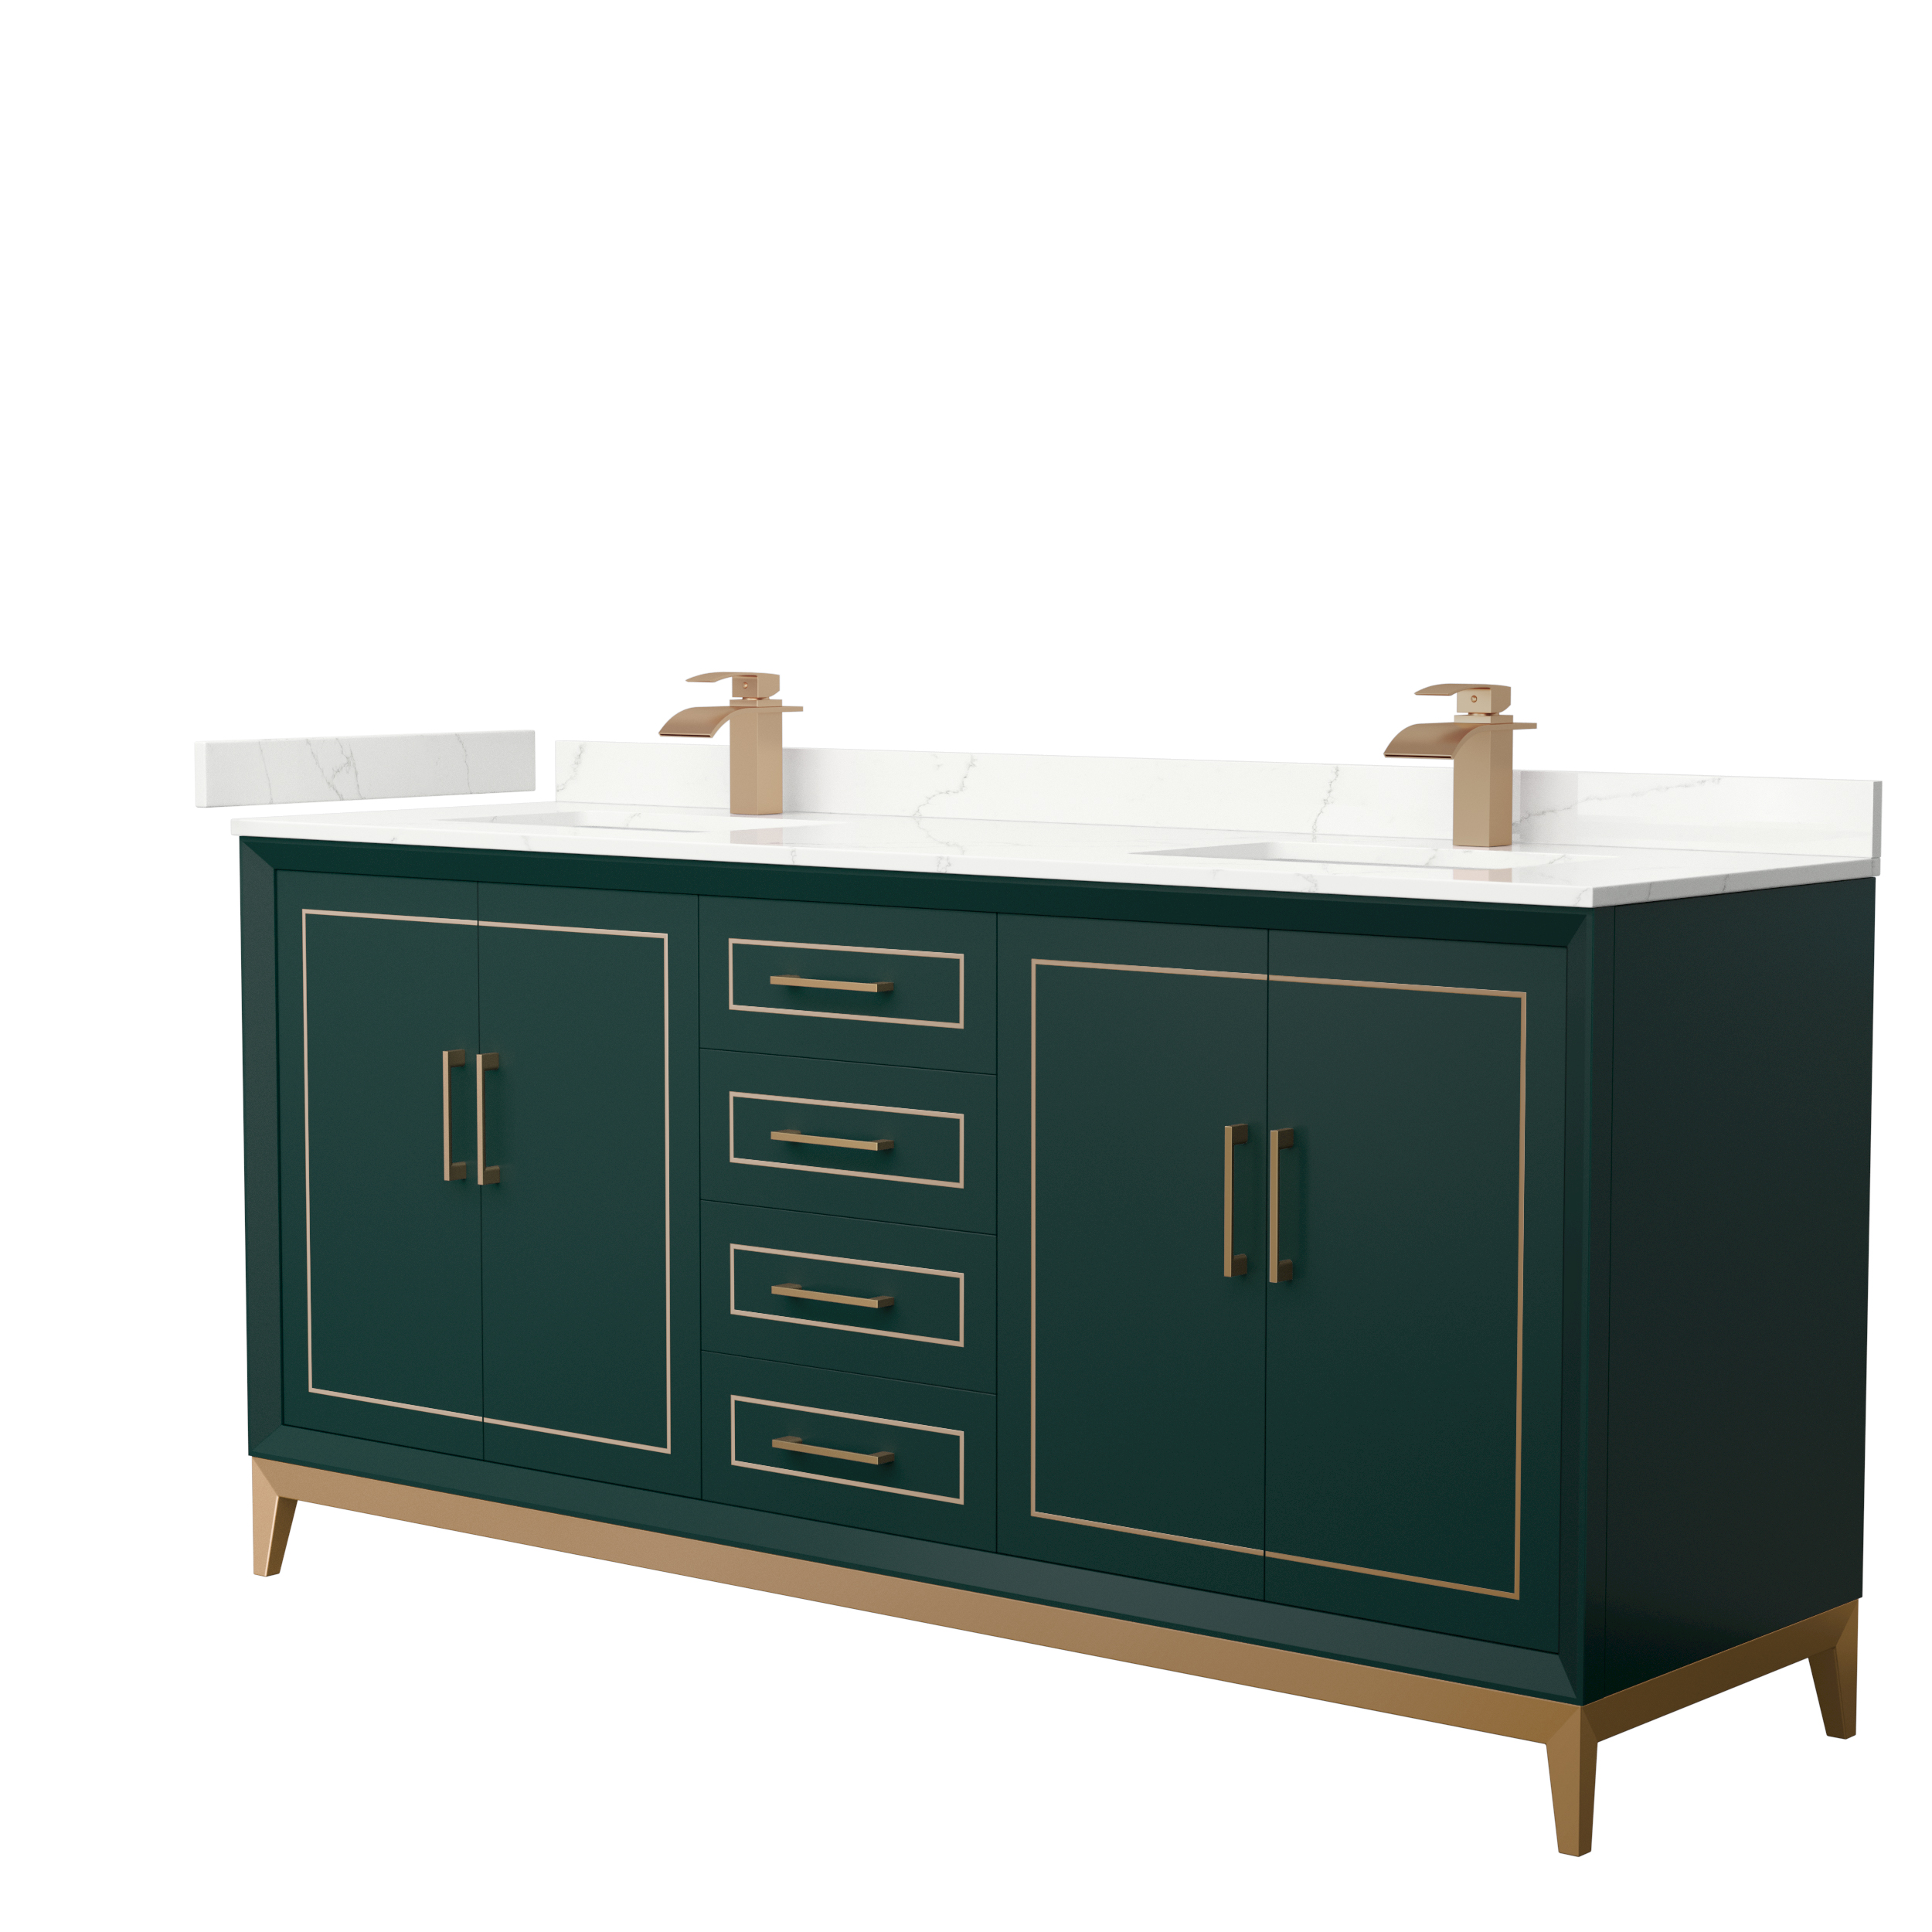 Marlena 72" Double Vanity with optional Quartz or Carrara Marble Counter - Green WC-5151-72-DBL-VAN-GRN_